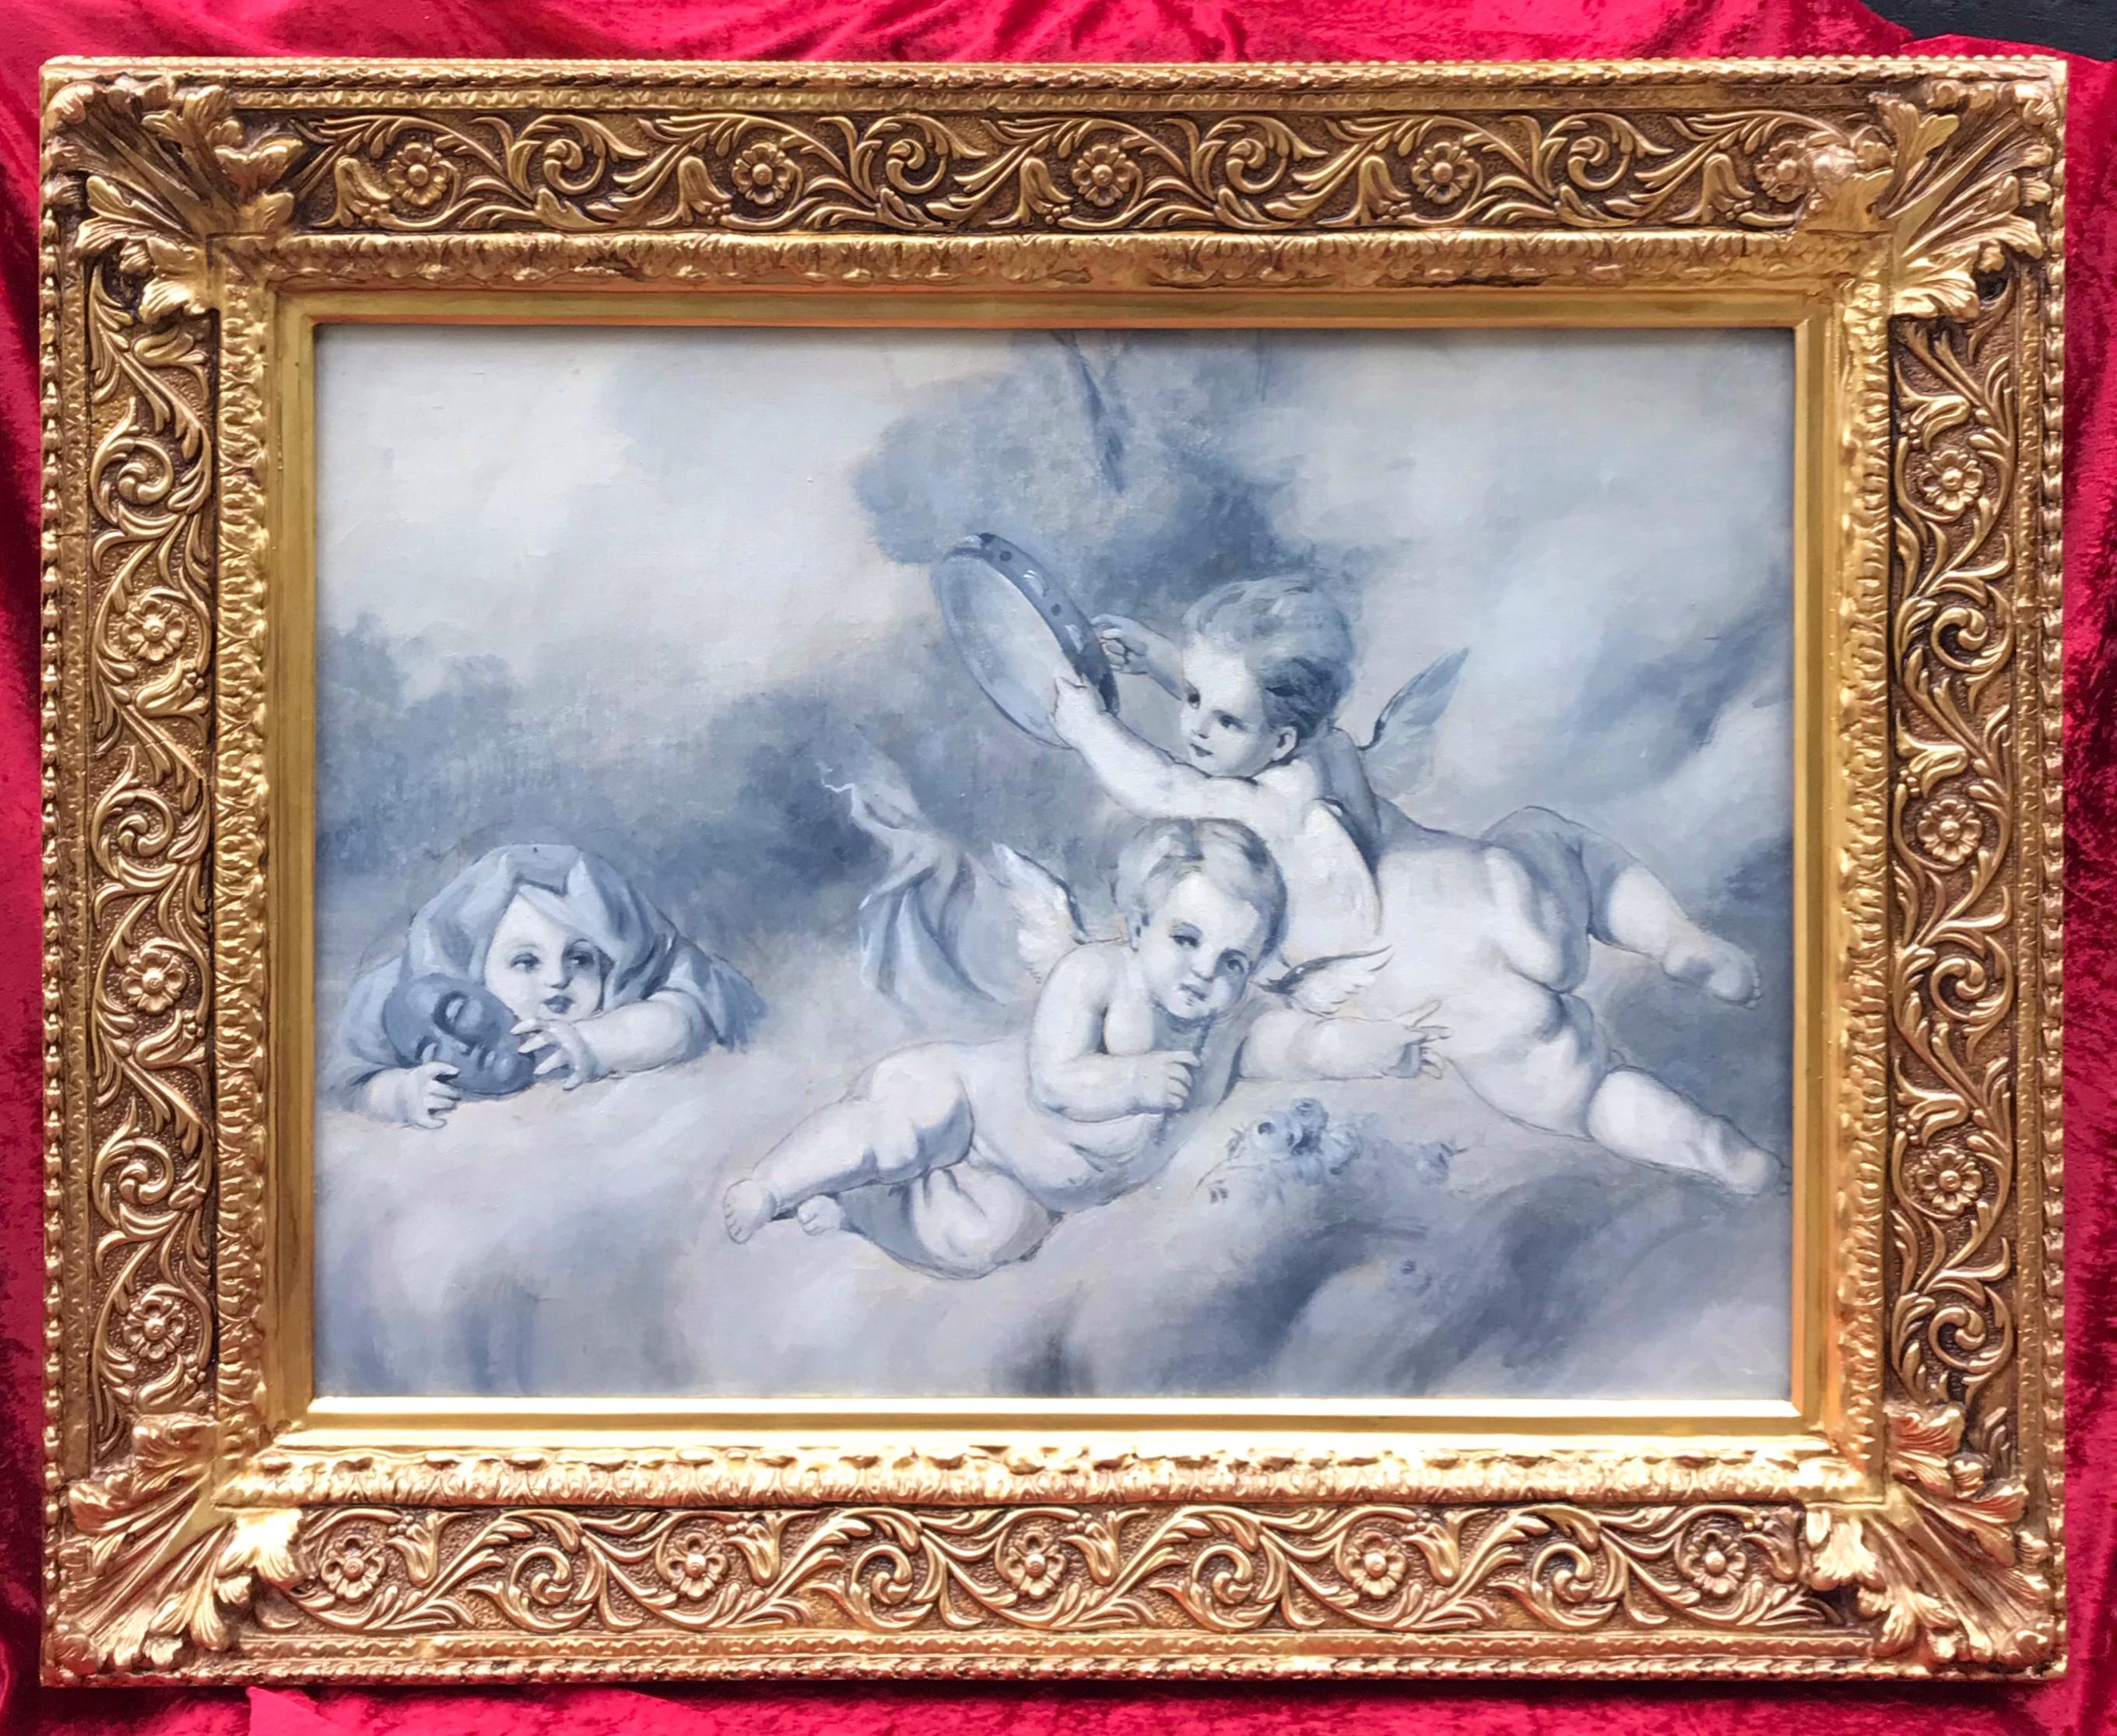 GRISAILLE 19th Century - Cherubs Are Playing Music